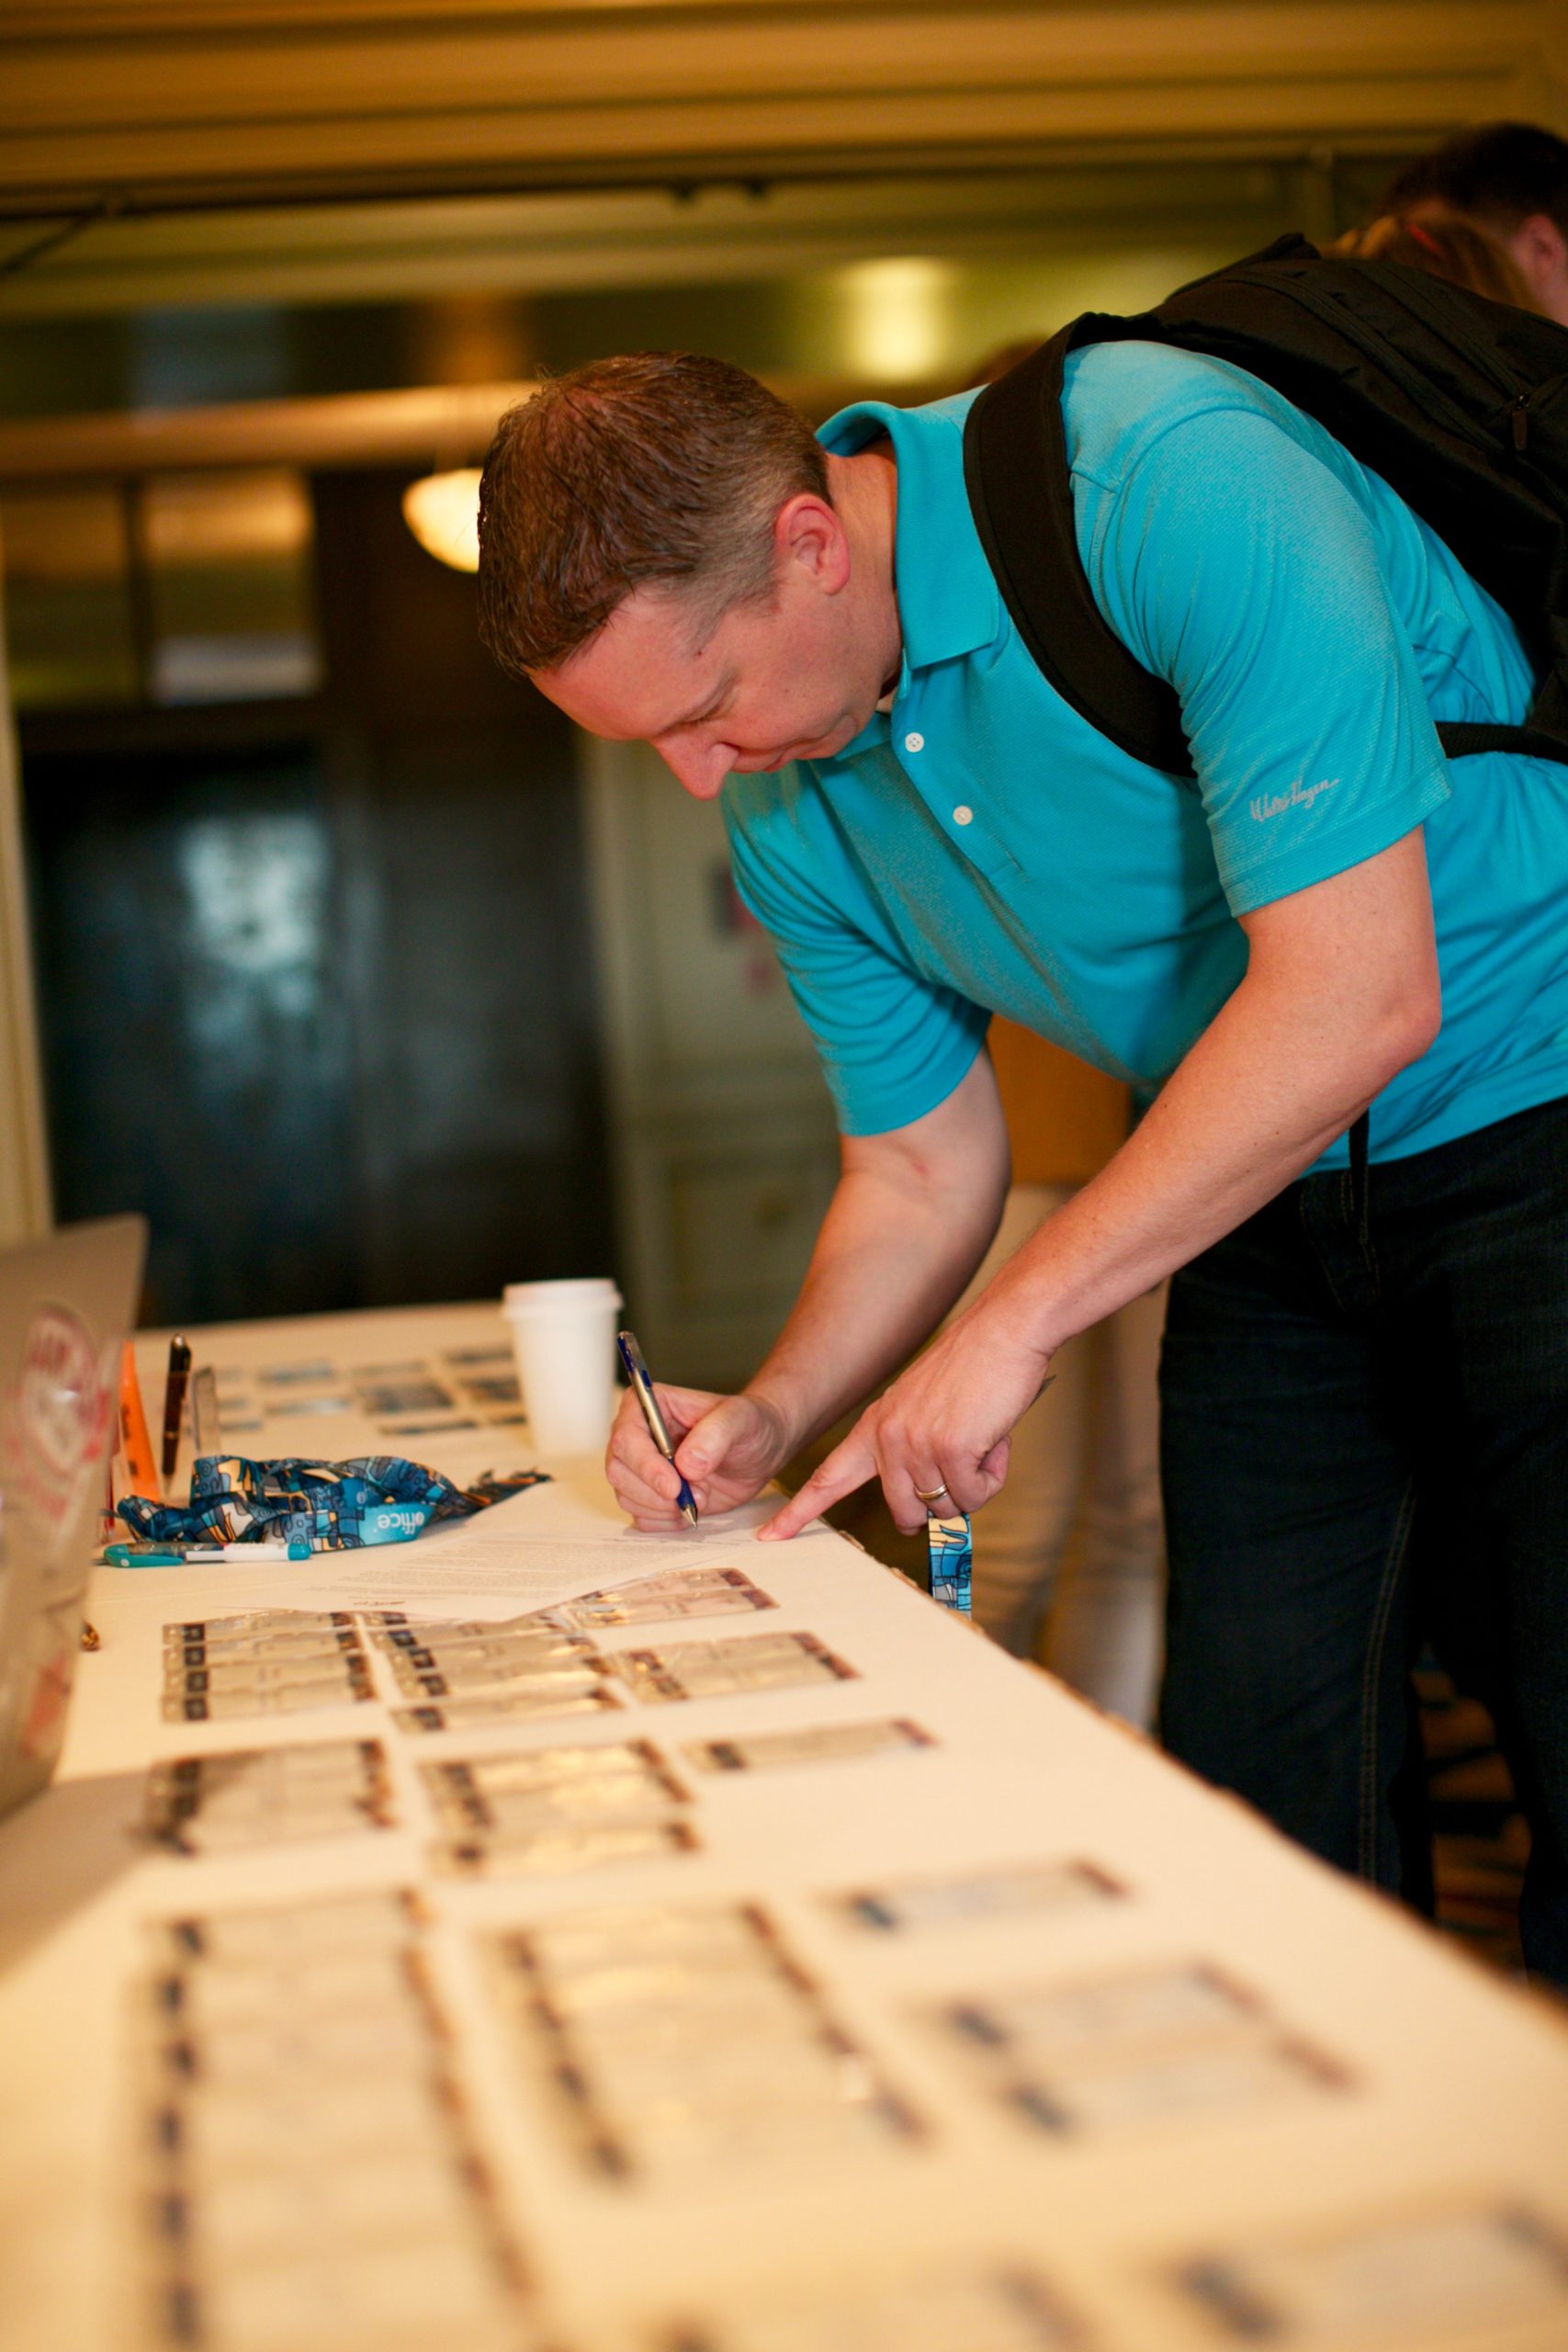 Customers check in to receive their name badges at ELEVATE